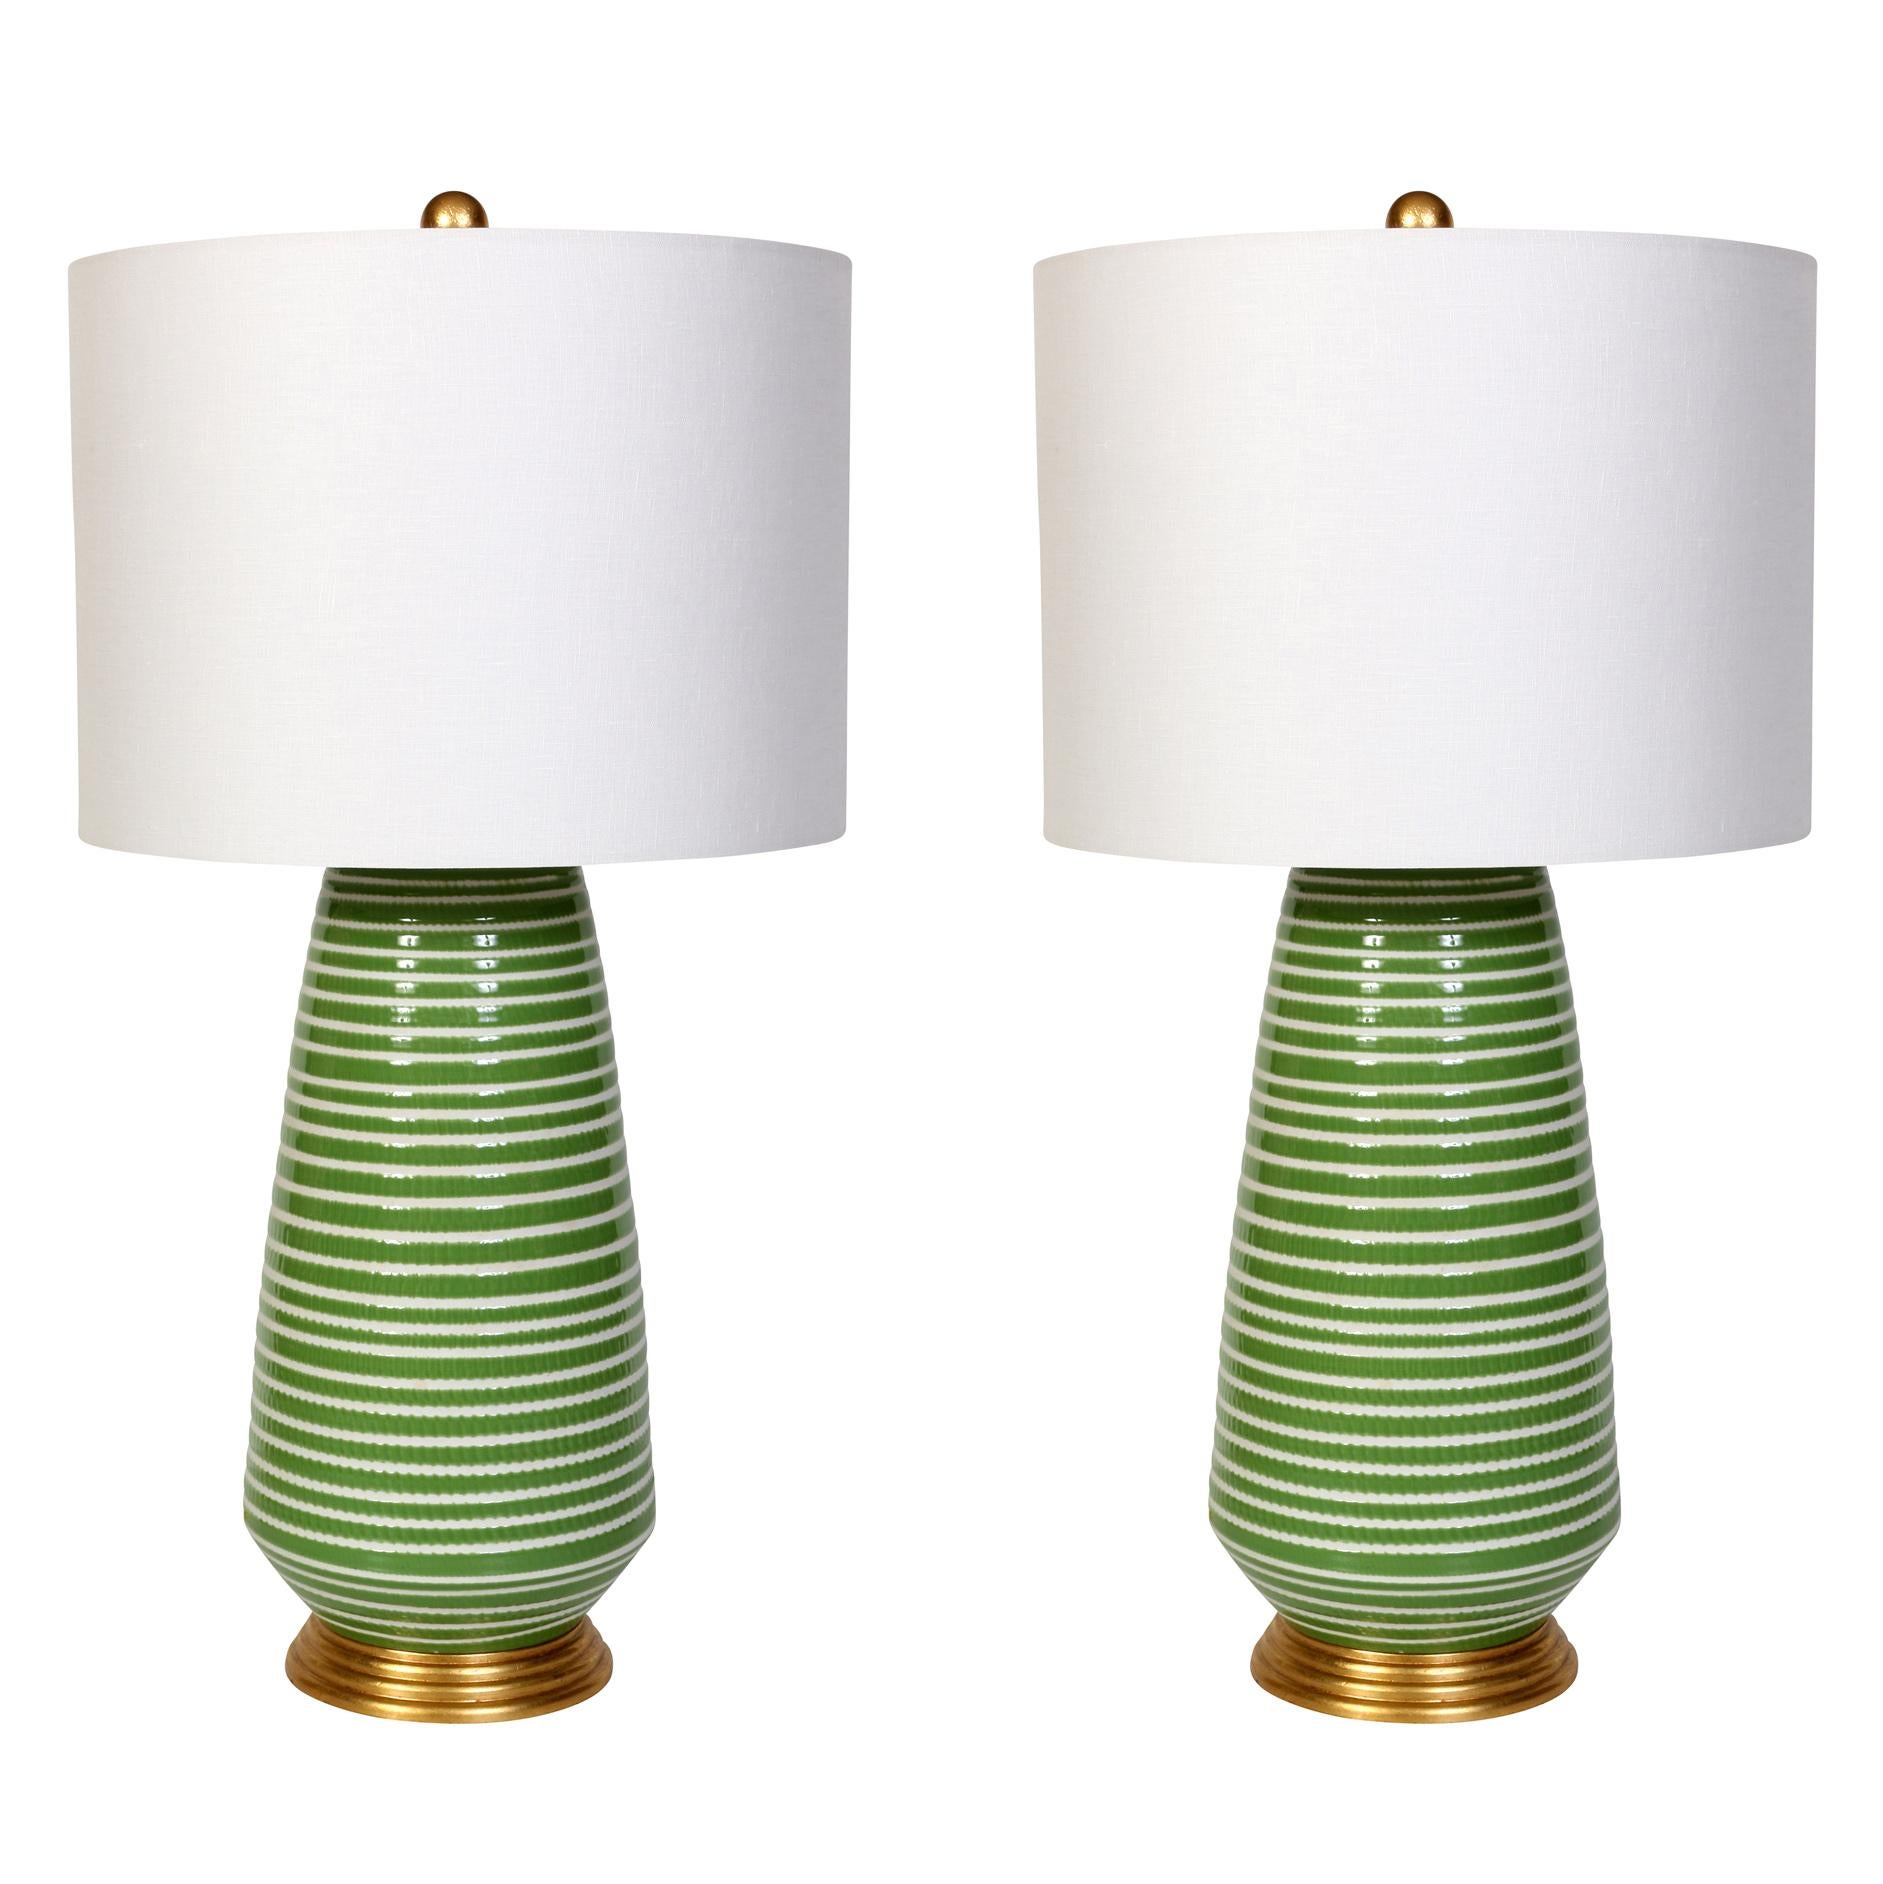 A pair of ceramic lamps in a cheerful green and white stripe  on a gold  base  with linen shades.  Ready to add some personality to a bedroom, living room or  family room! Priced individually, but a pair is available. Please note price listed is per